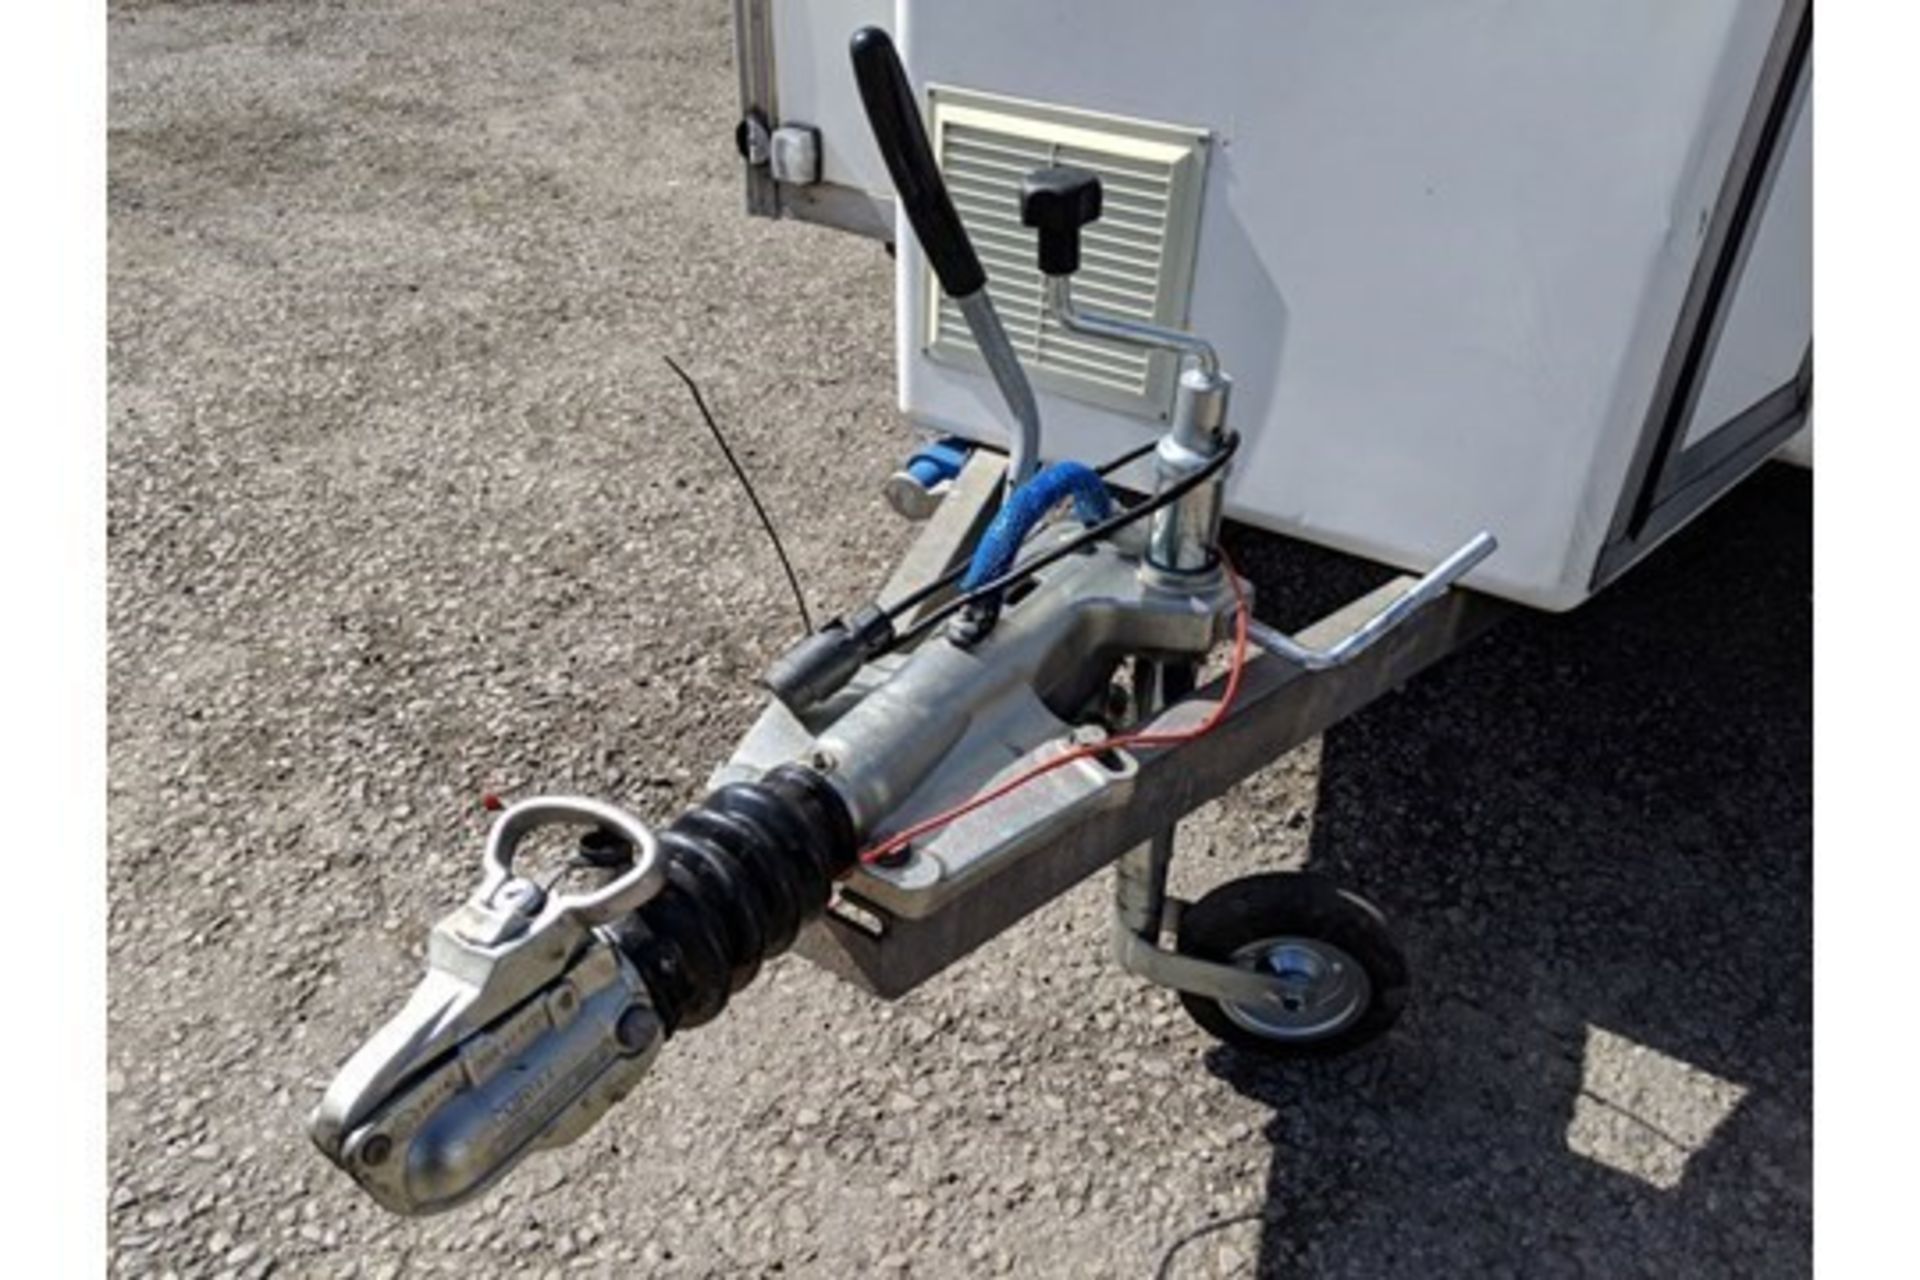 Twin Shower 3 Section Trailer Unit Could Be Used For Mobile Dog Grooming - Image 9 of 20